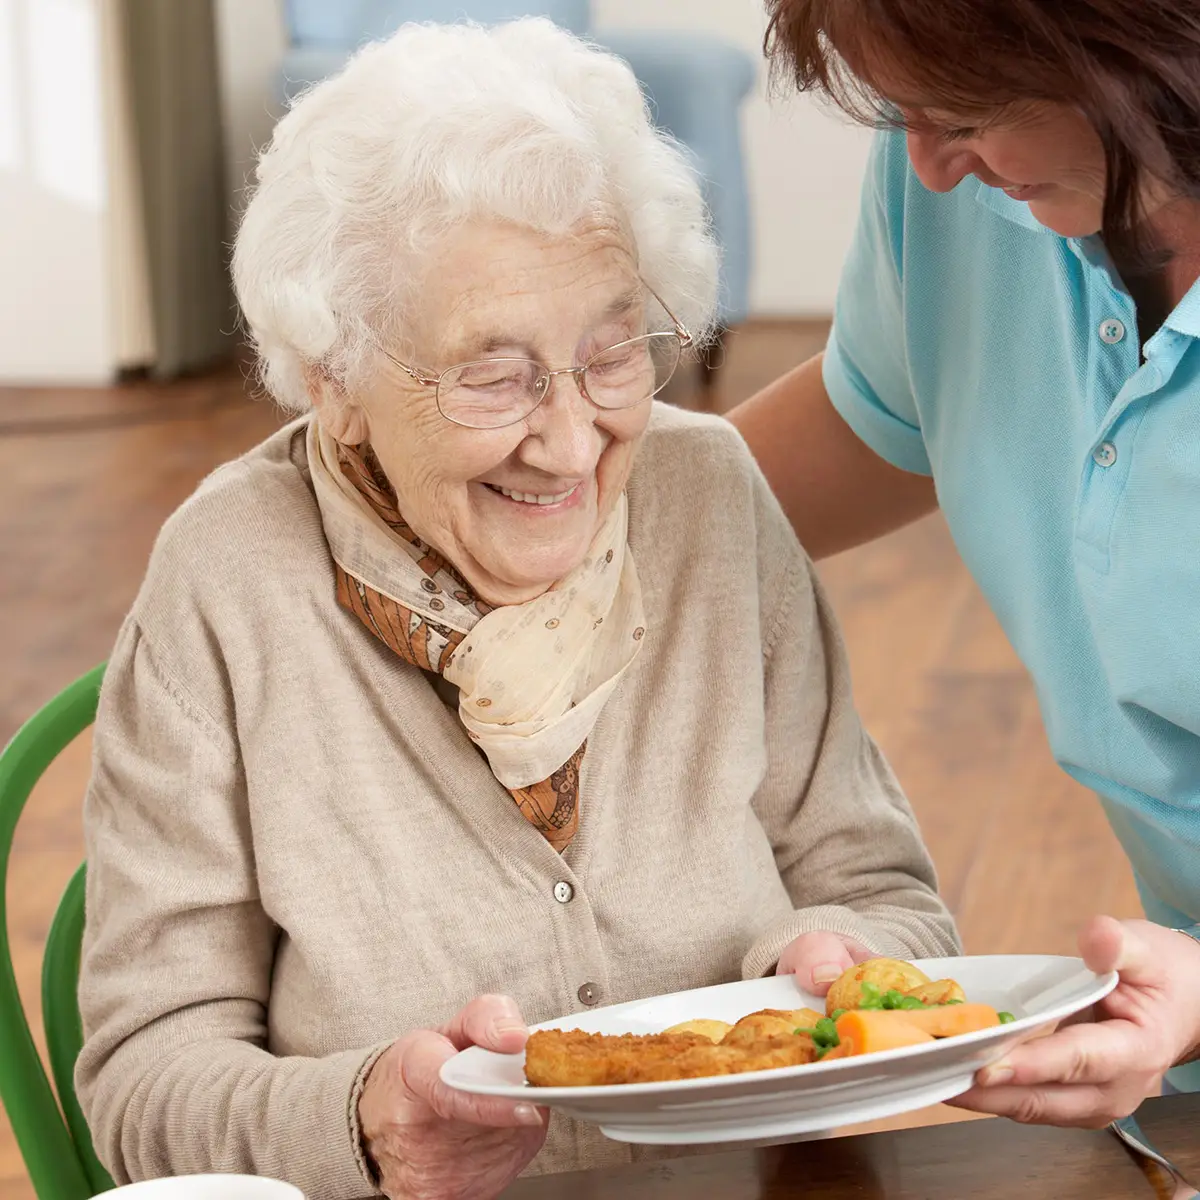 Senior Woman Being Served Meal By Carer